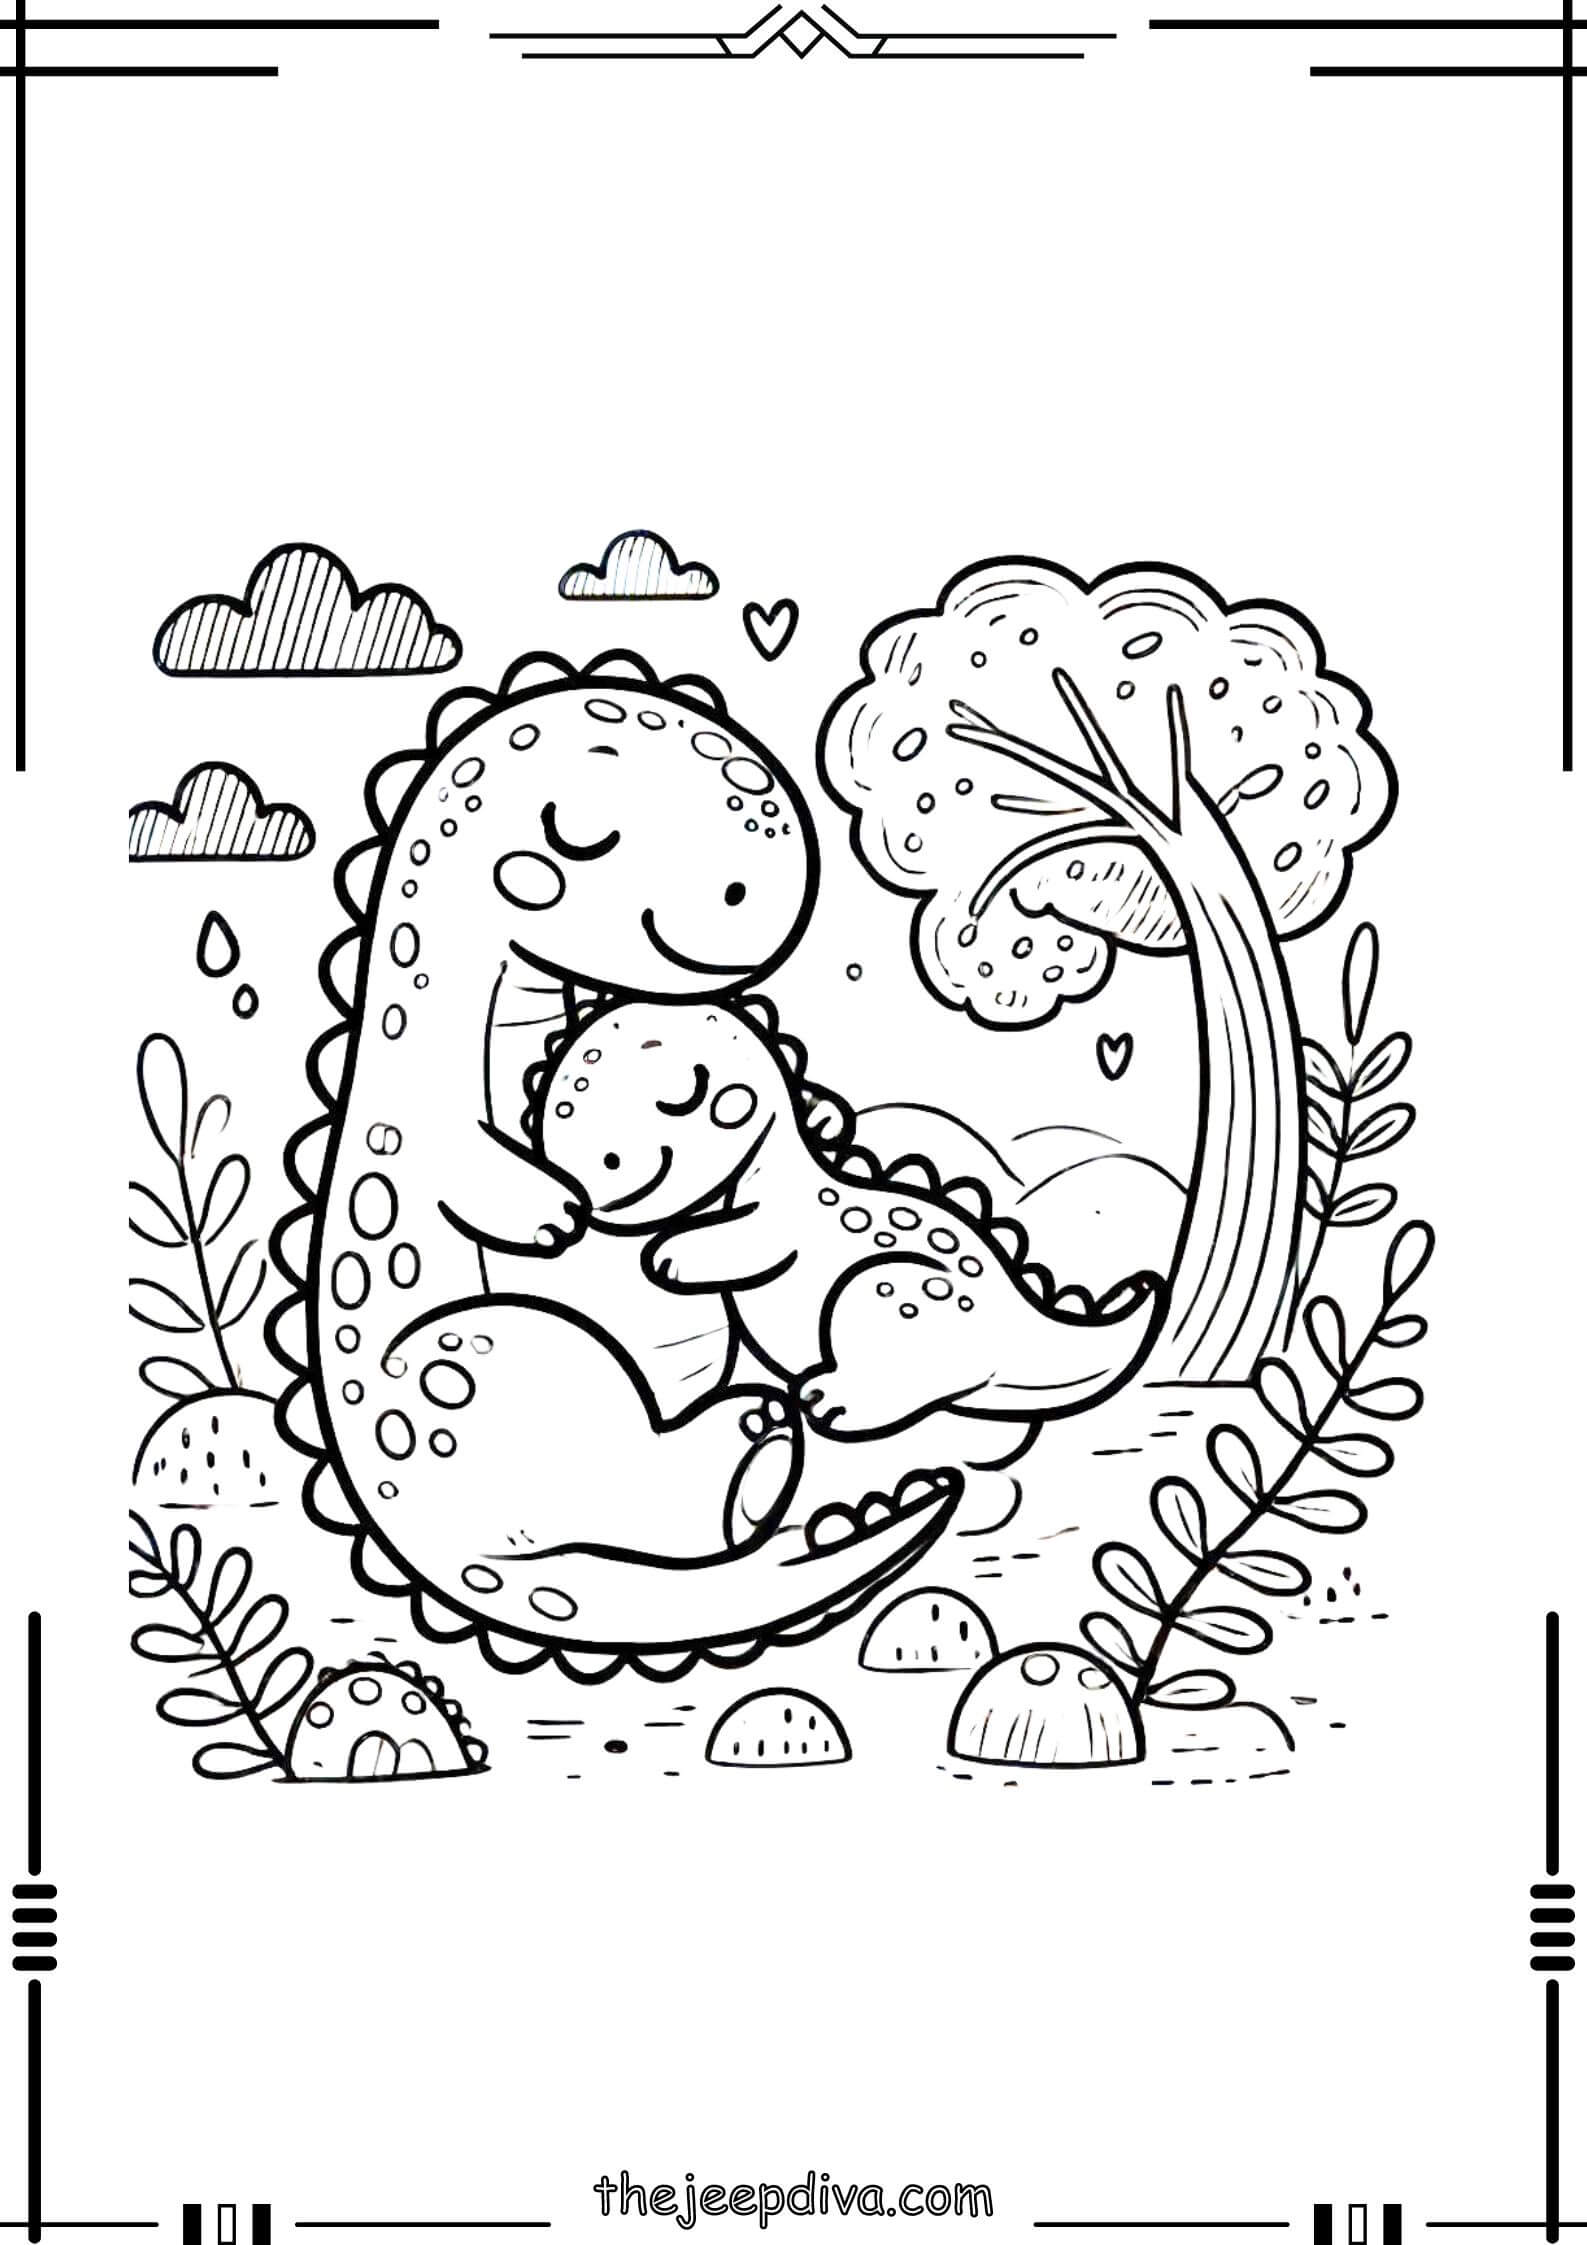 Dinosaur-Colouring-Pages-Hard-2